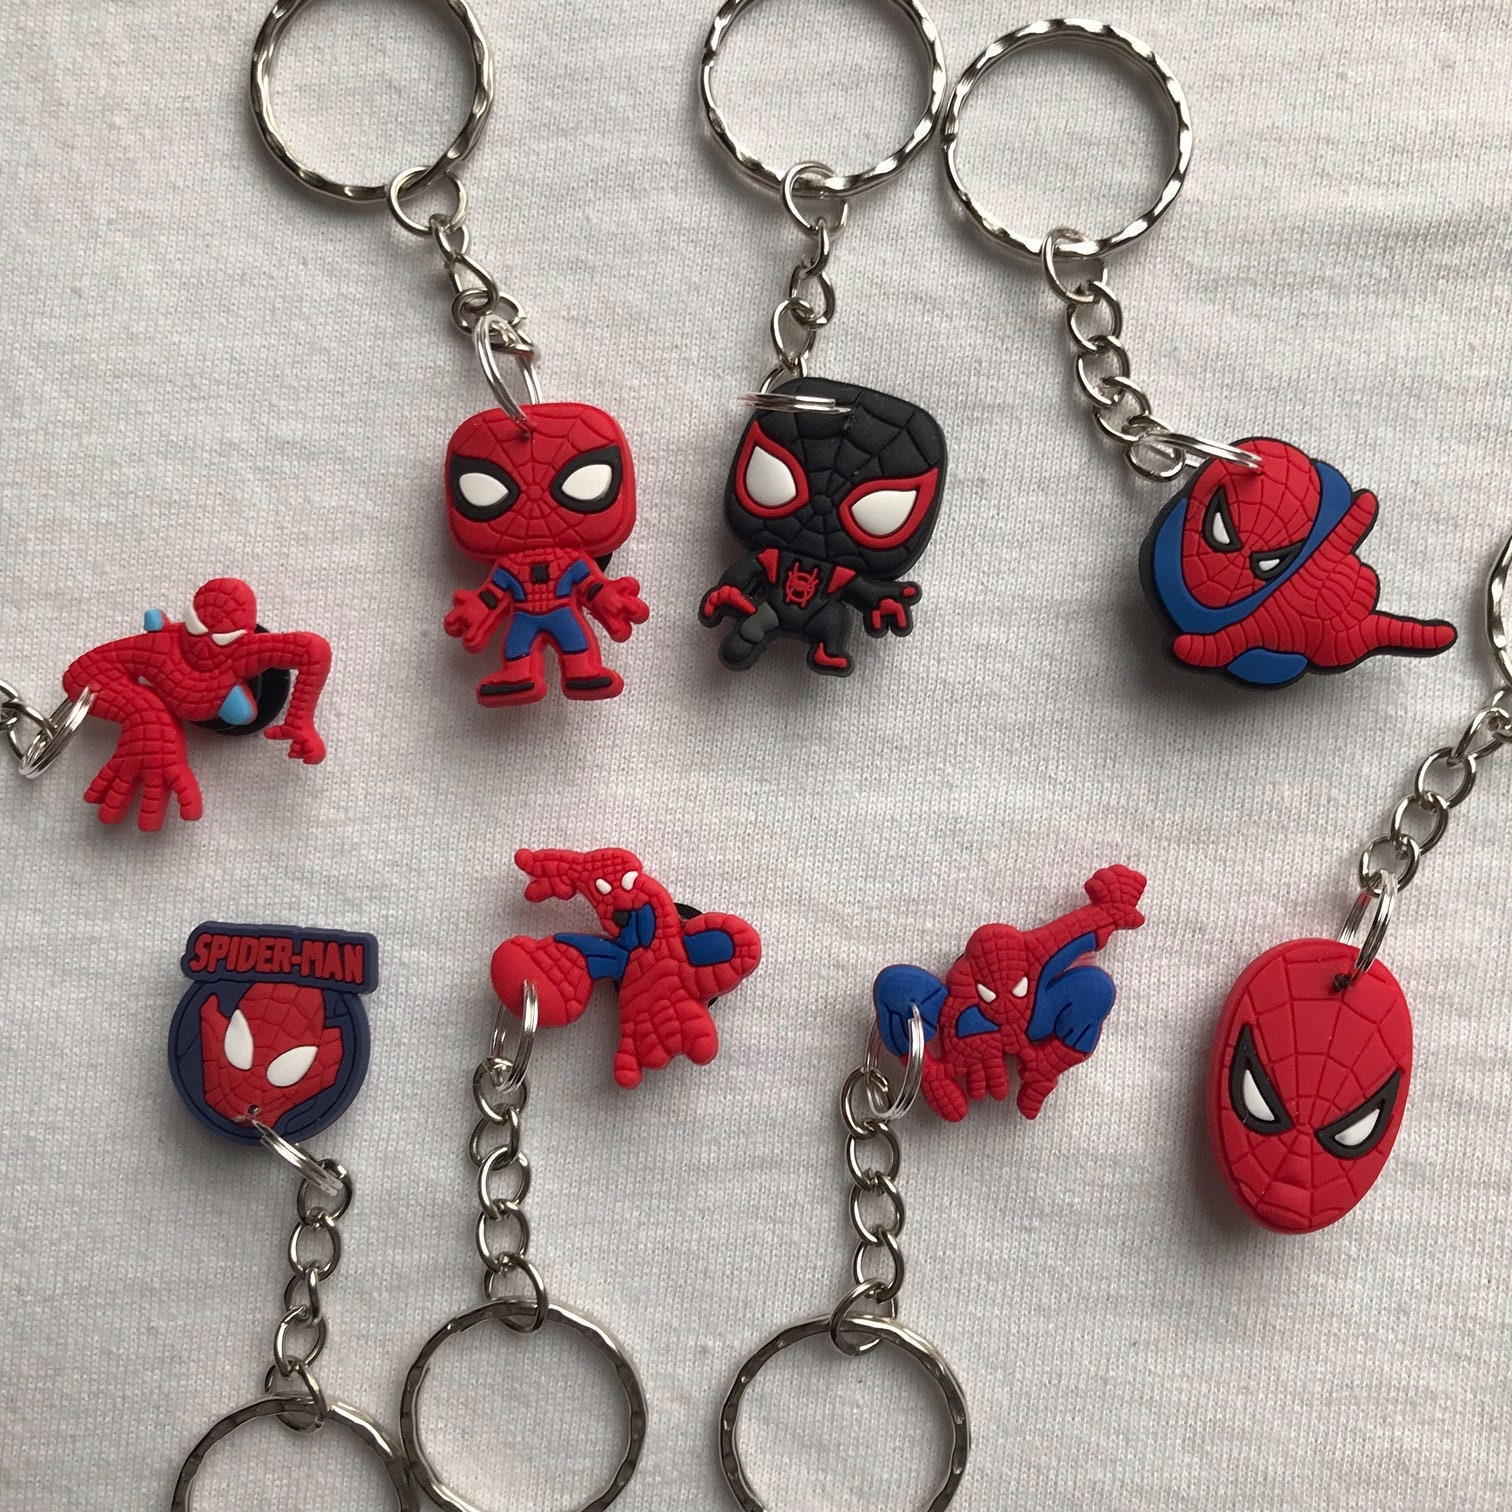 New spider safety keychain! Any good name ideas💜👇🏻 My favorite